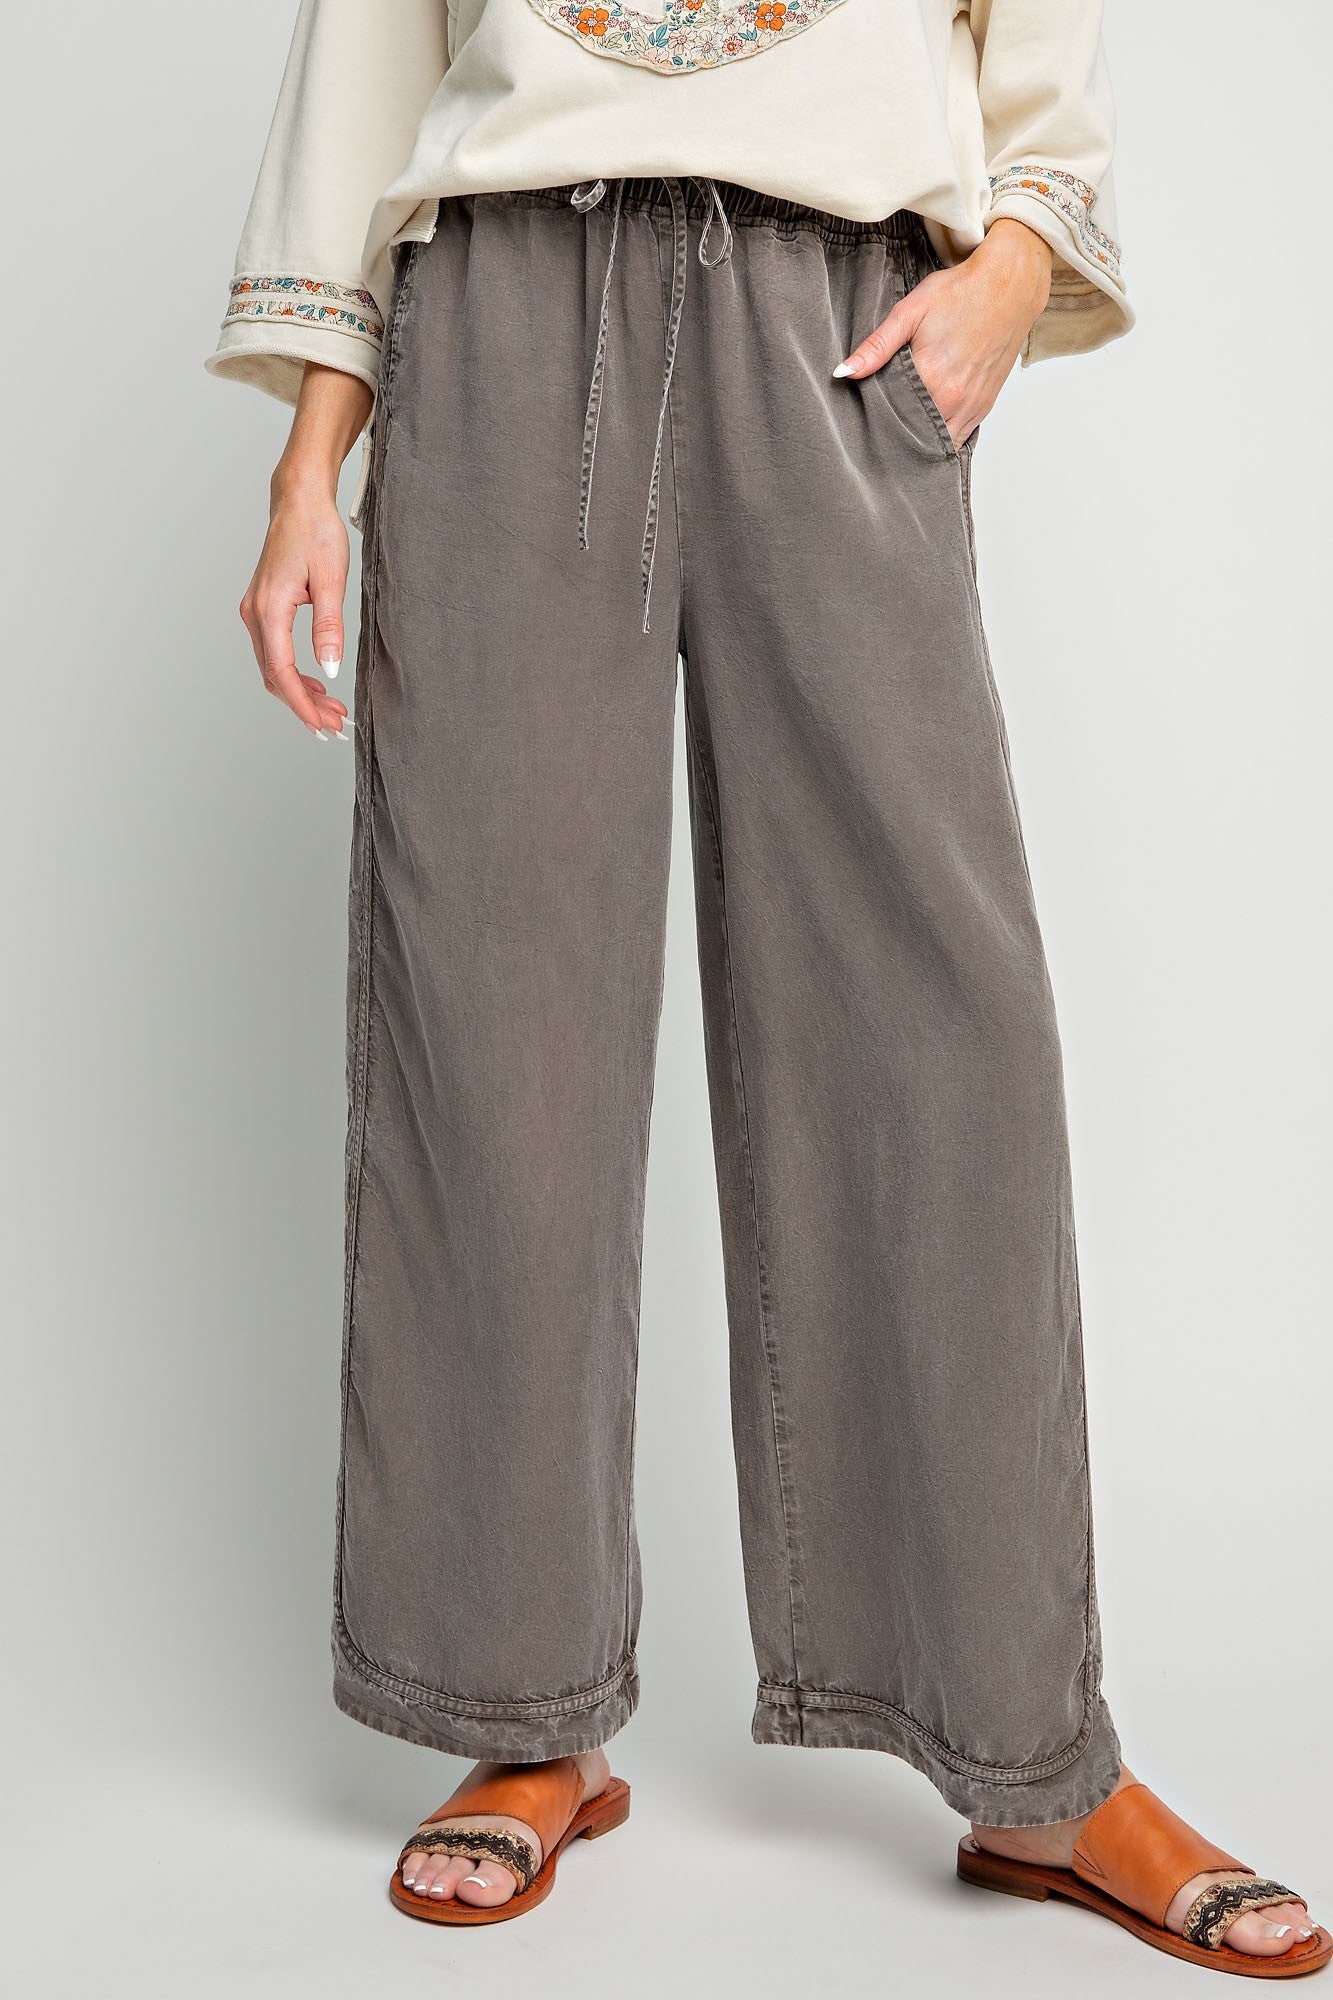 Easel Mineral Washed Wide Leg Pants in Ash